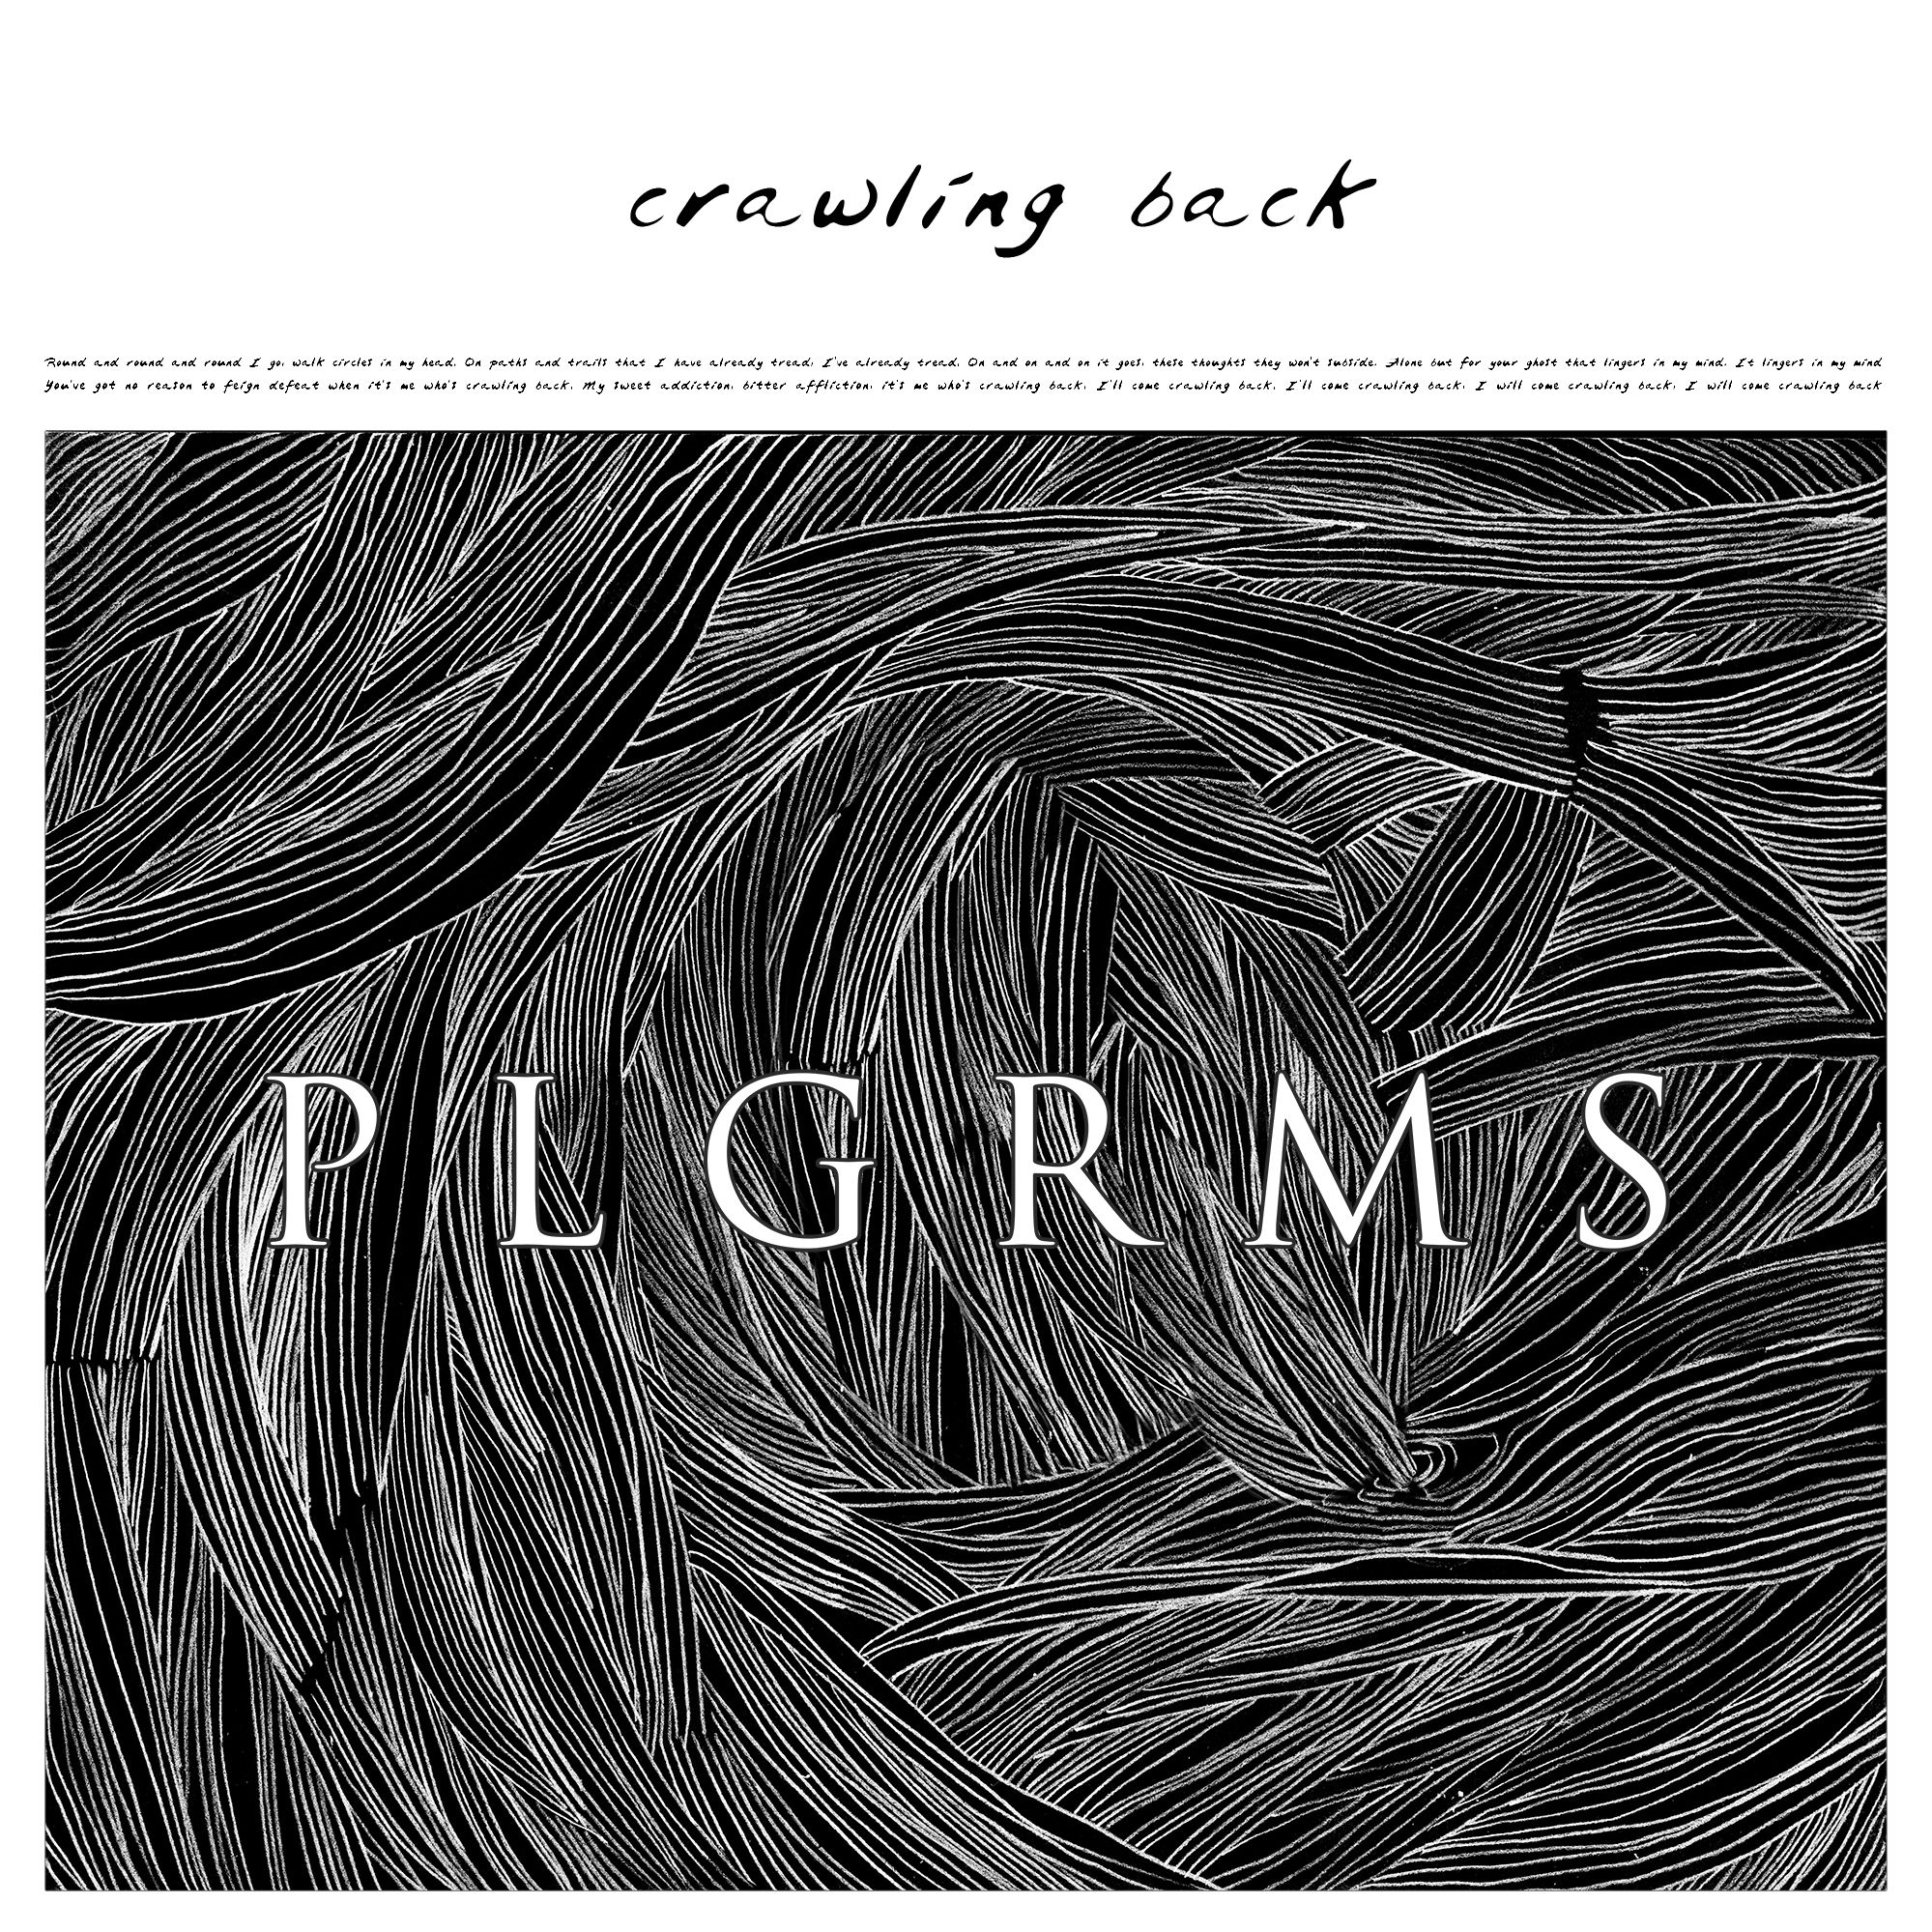 New: PLGRMS – Crawling Back